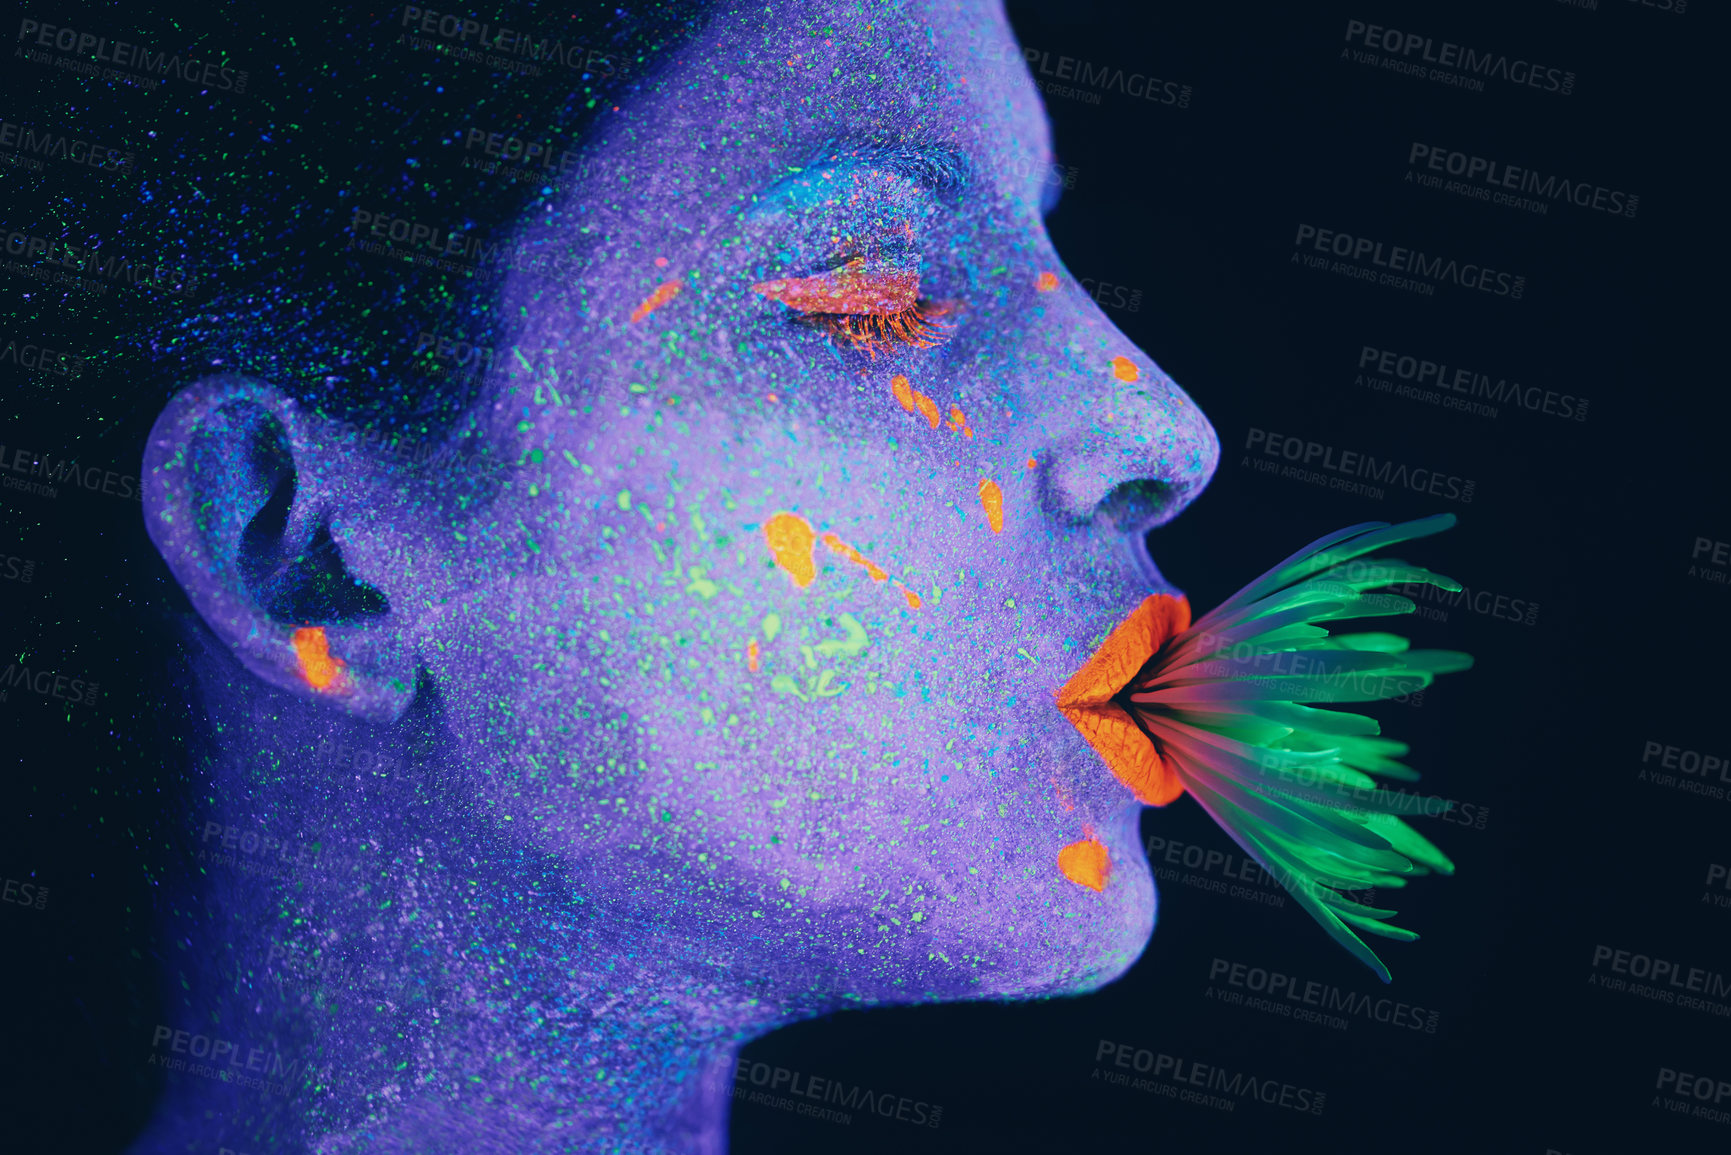 Buy stock photo Shot of a young  woman posing with neon paint on her face